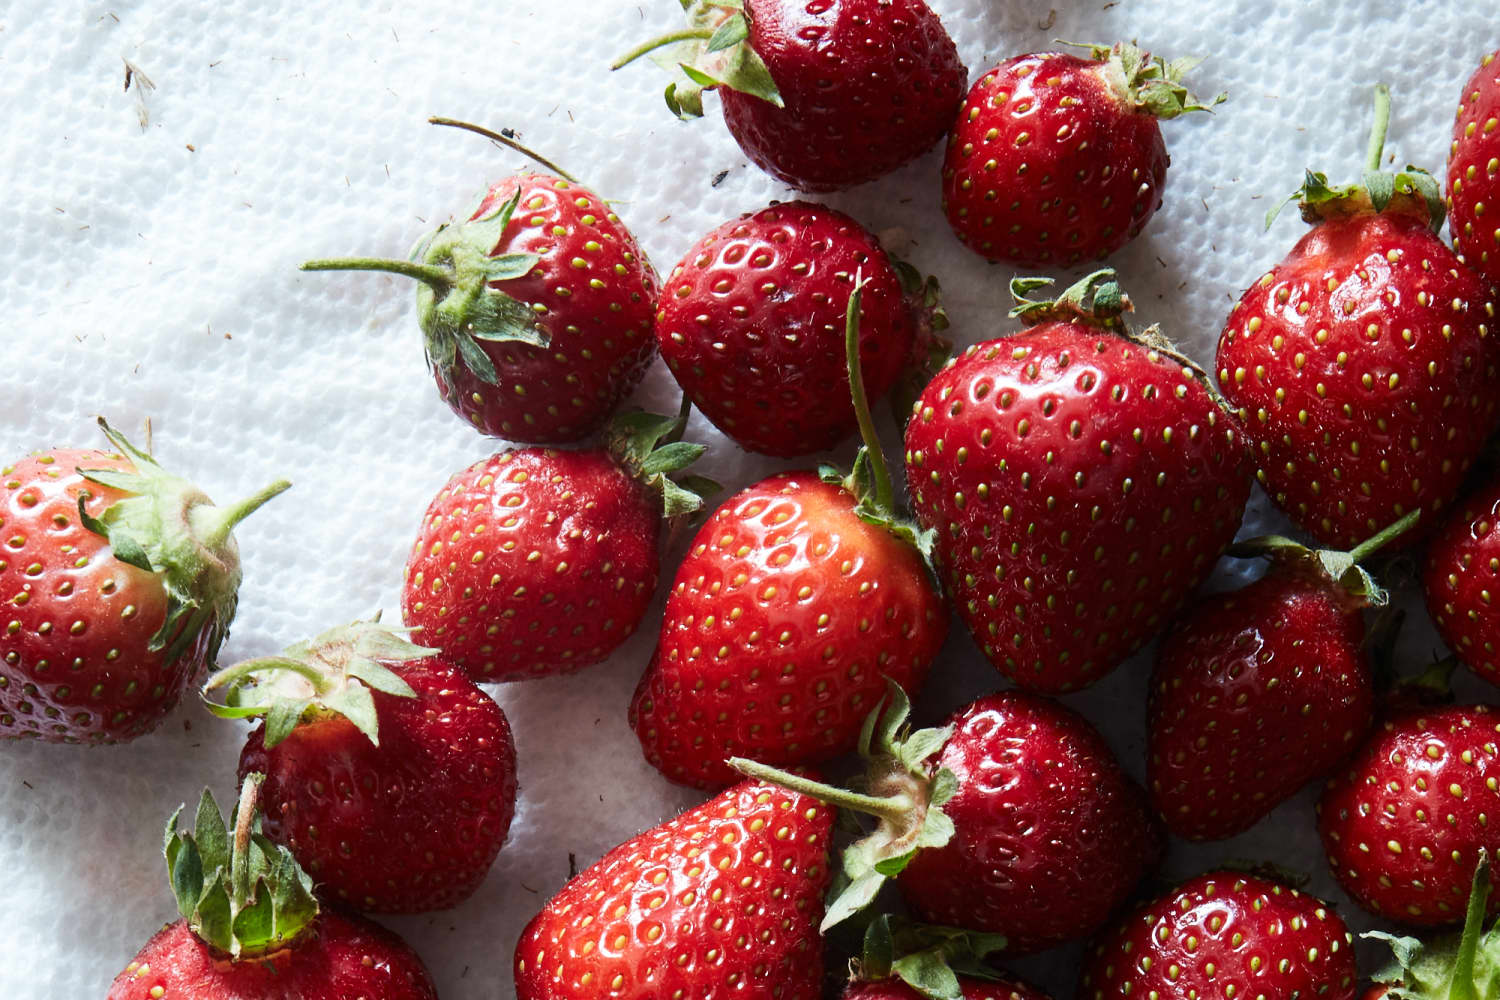 WATCH: The strawberry hack to show you how to remove the stem